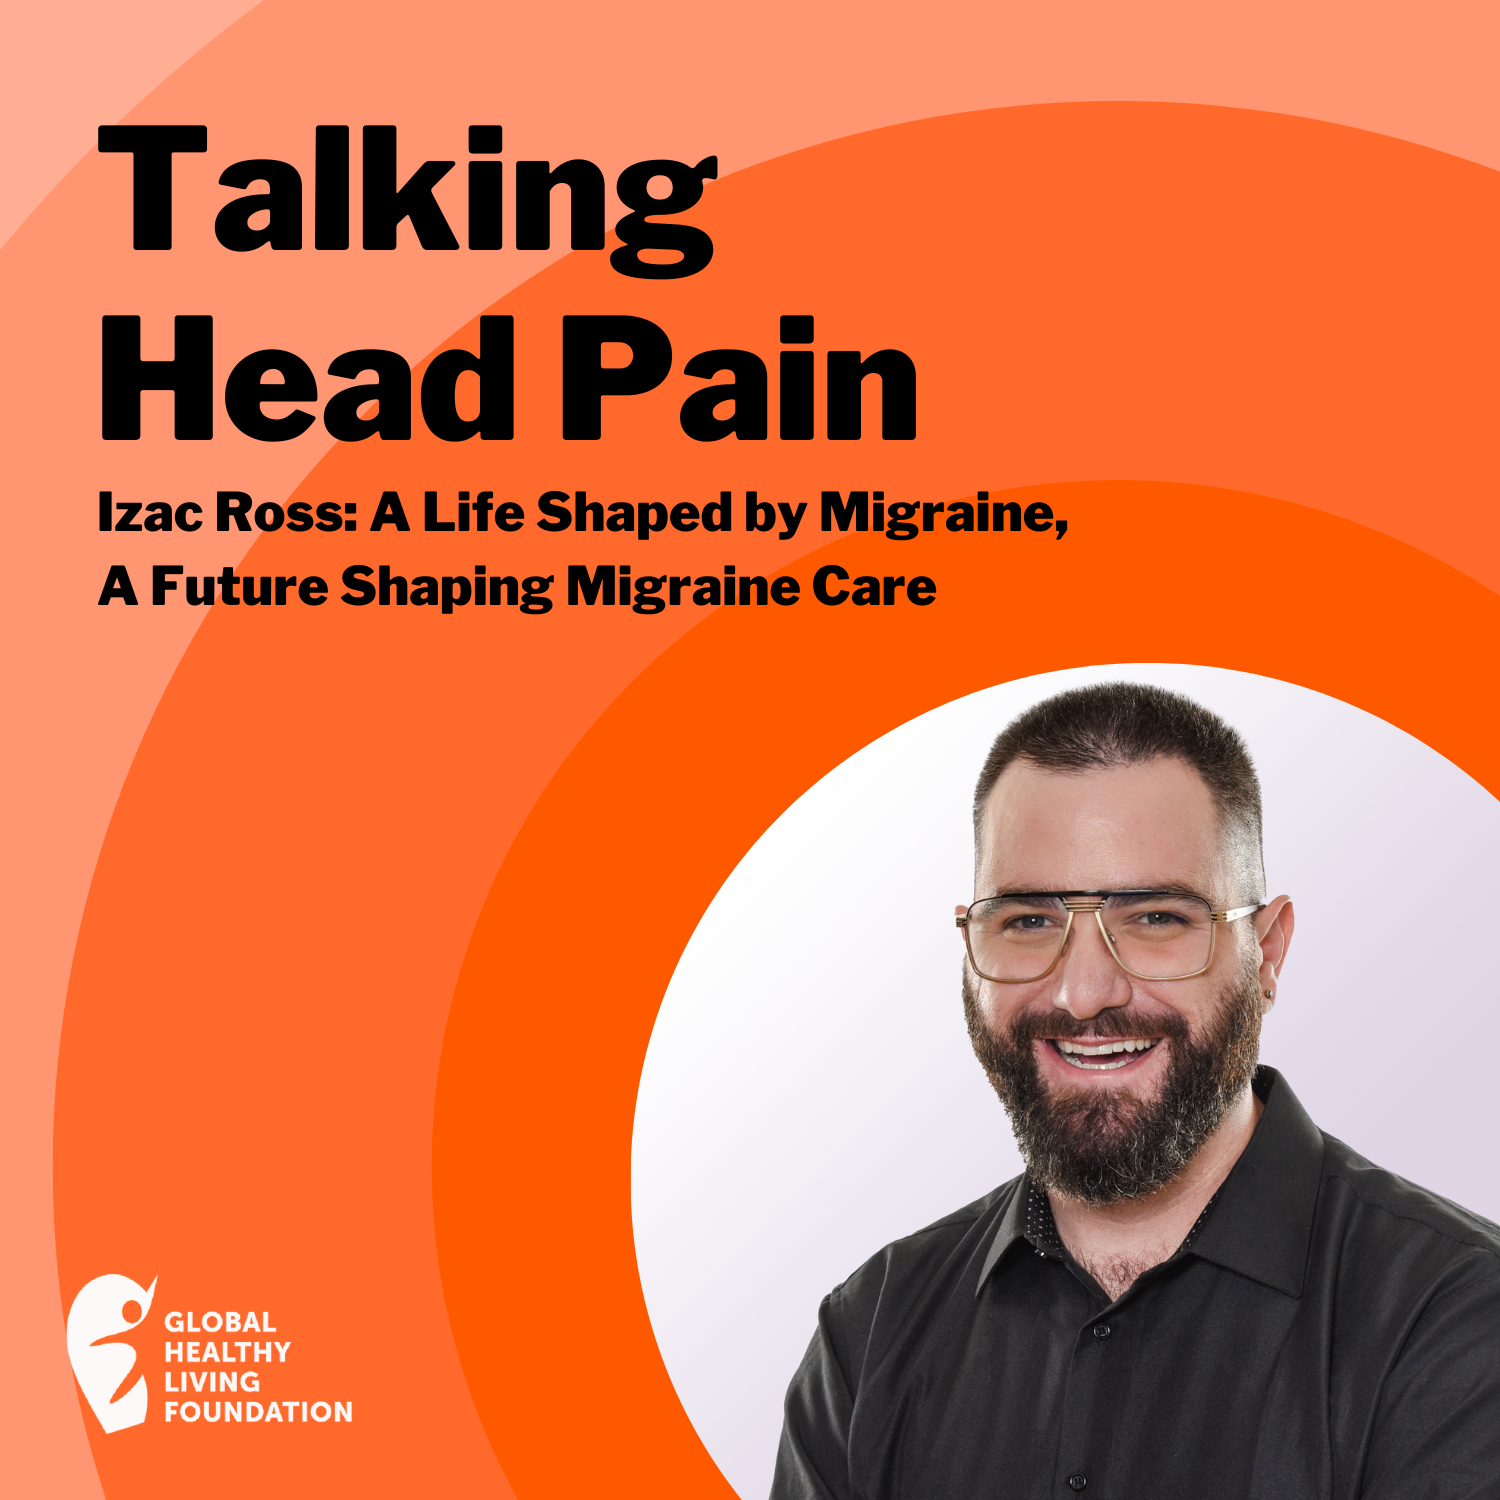 Izac Ross: A Life Shaped by Migraine, A Future Shaping Migraine Care